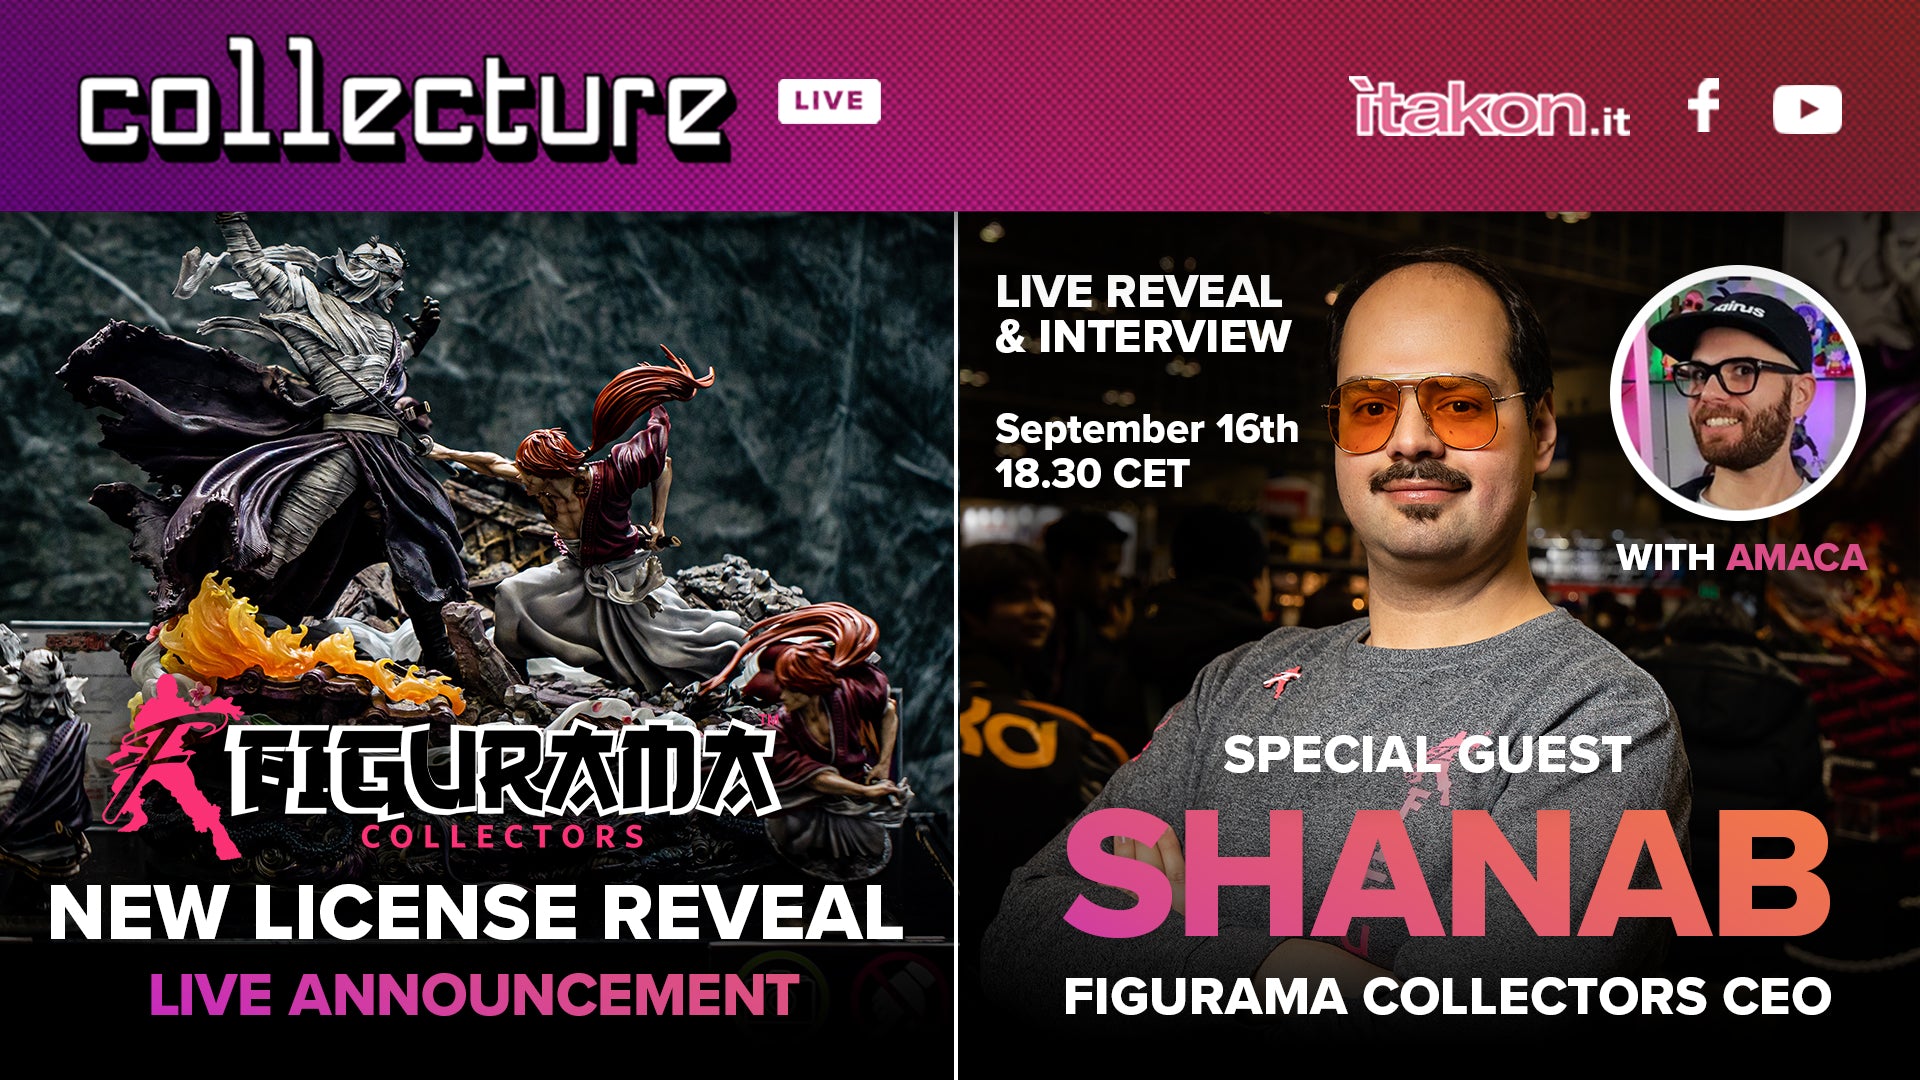 FIGURAMA CEO MR. SHANAB & NEW LICENSE REVEAL to be featured on ITAKON COLLECTURE LIVE